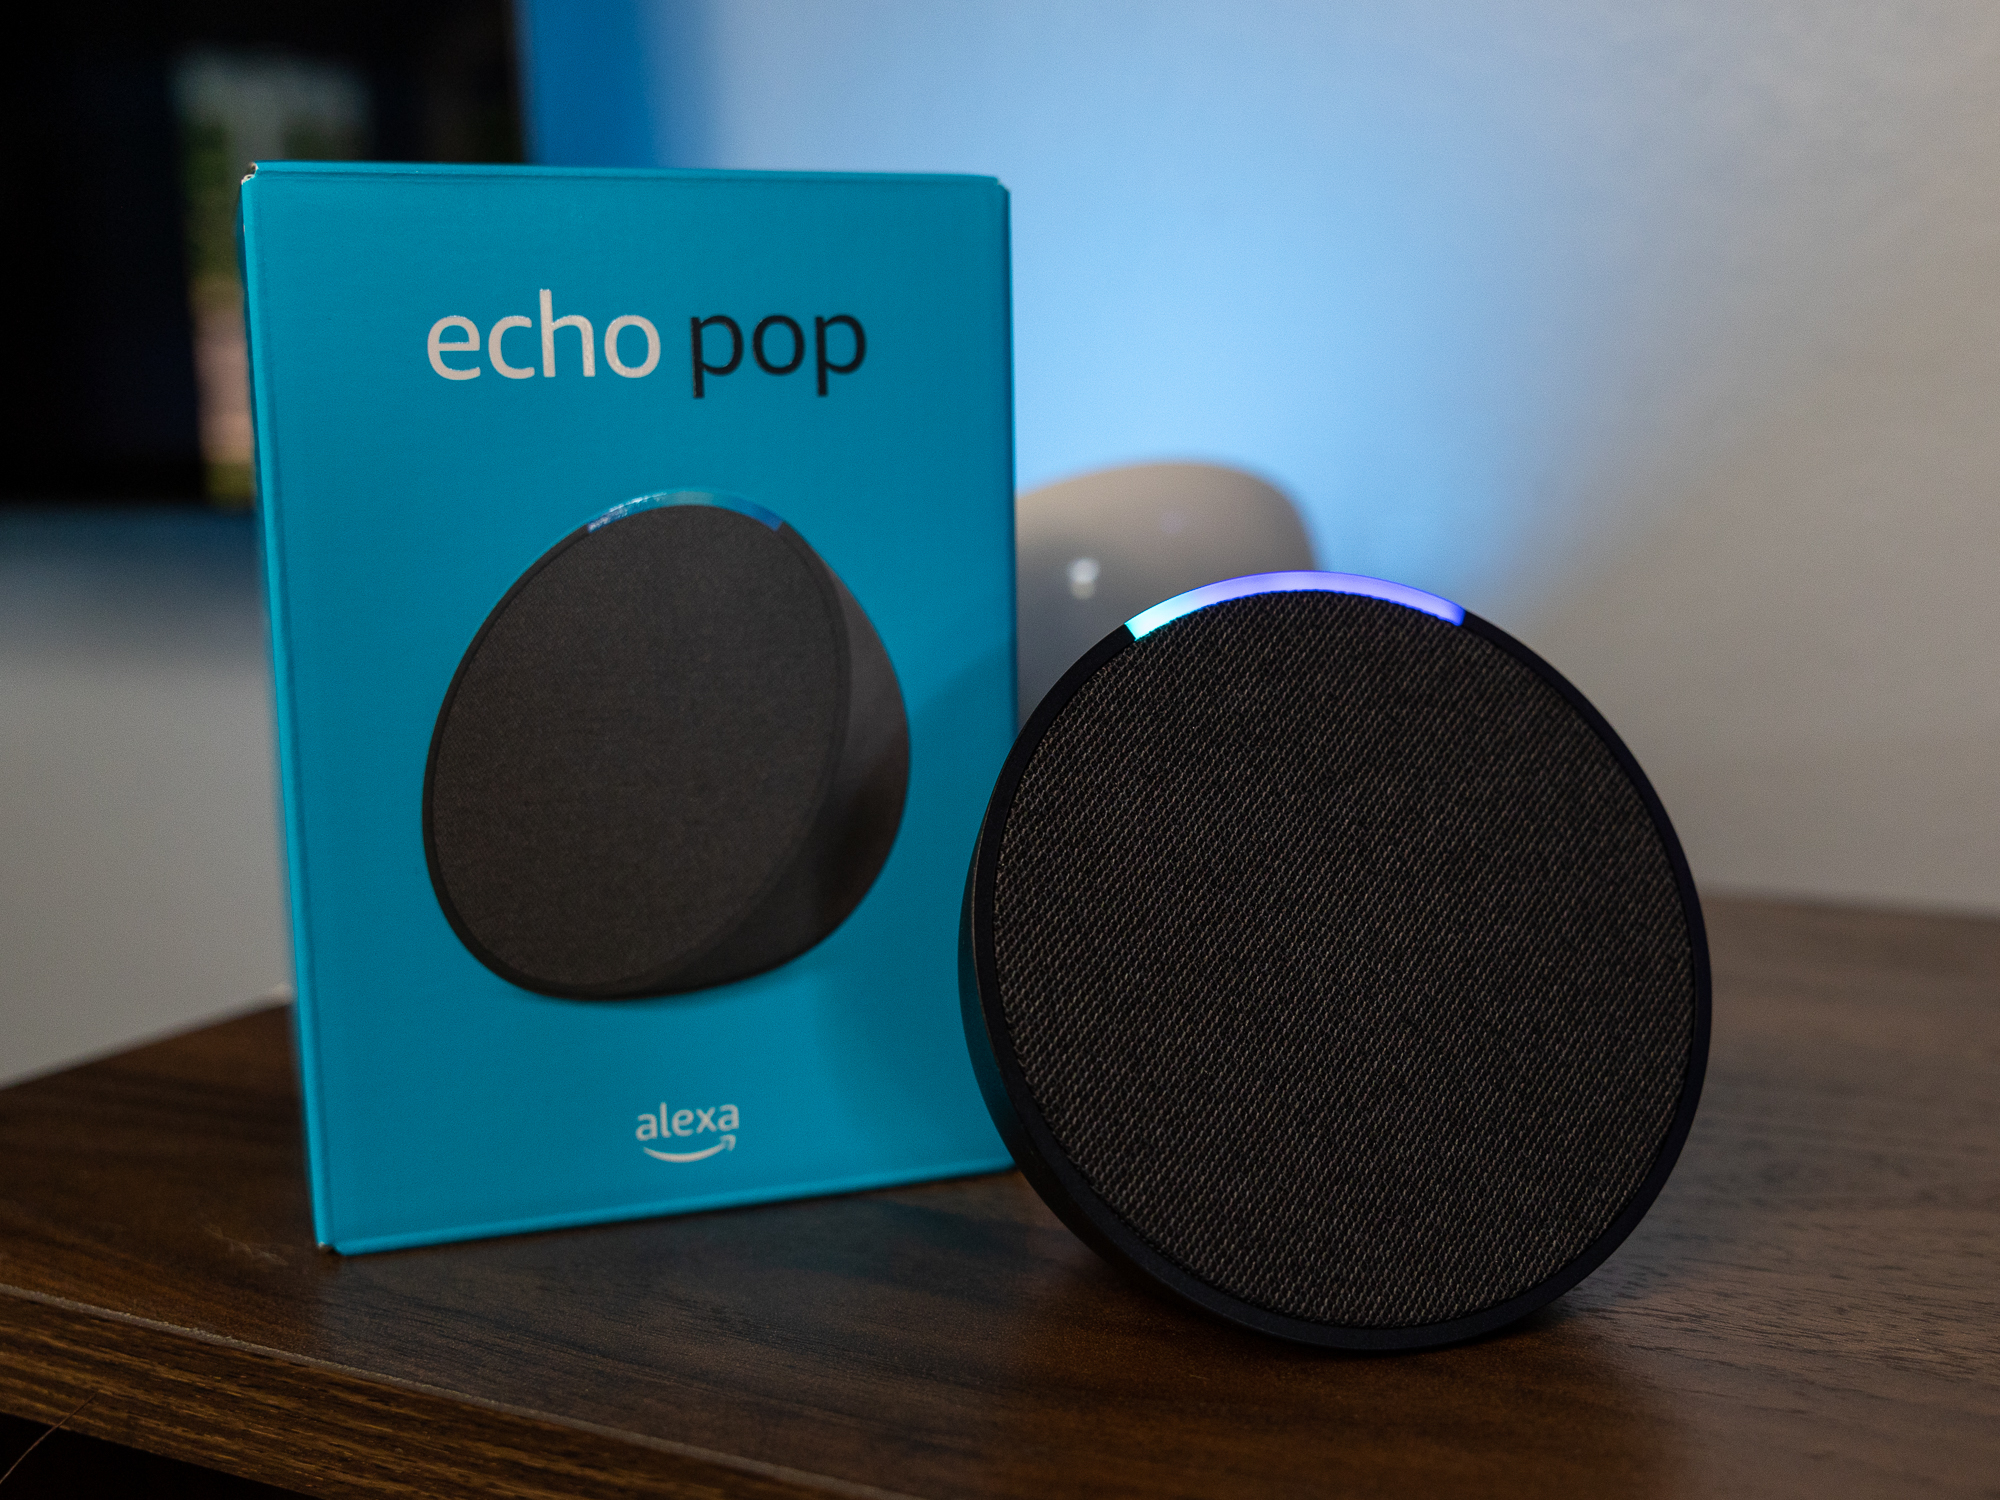 The Amazon Echo Pop and its retail box.